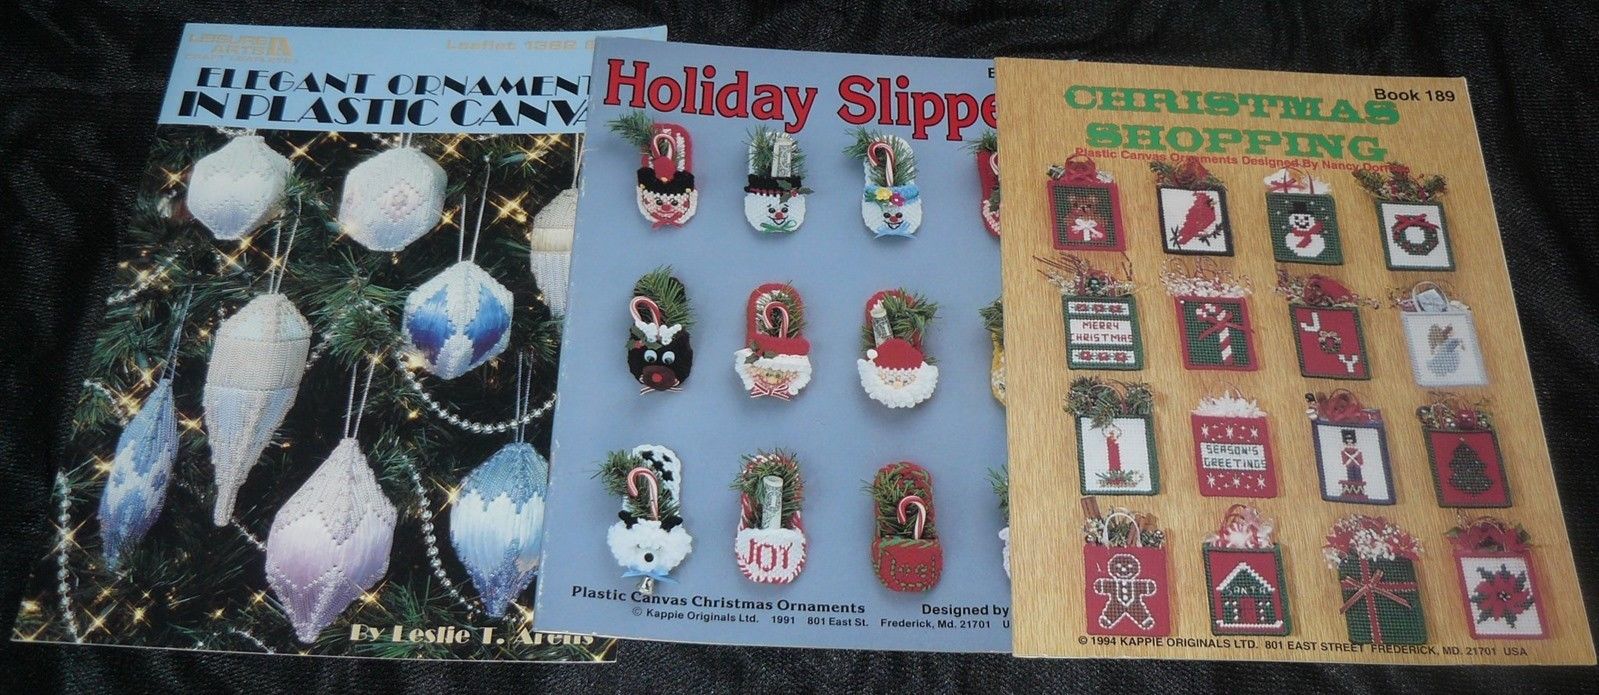 Lot of 3 Plastic Canvas Pattern Books Leaflets Holiday Slippers Ornaments ....